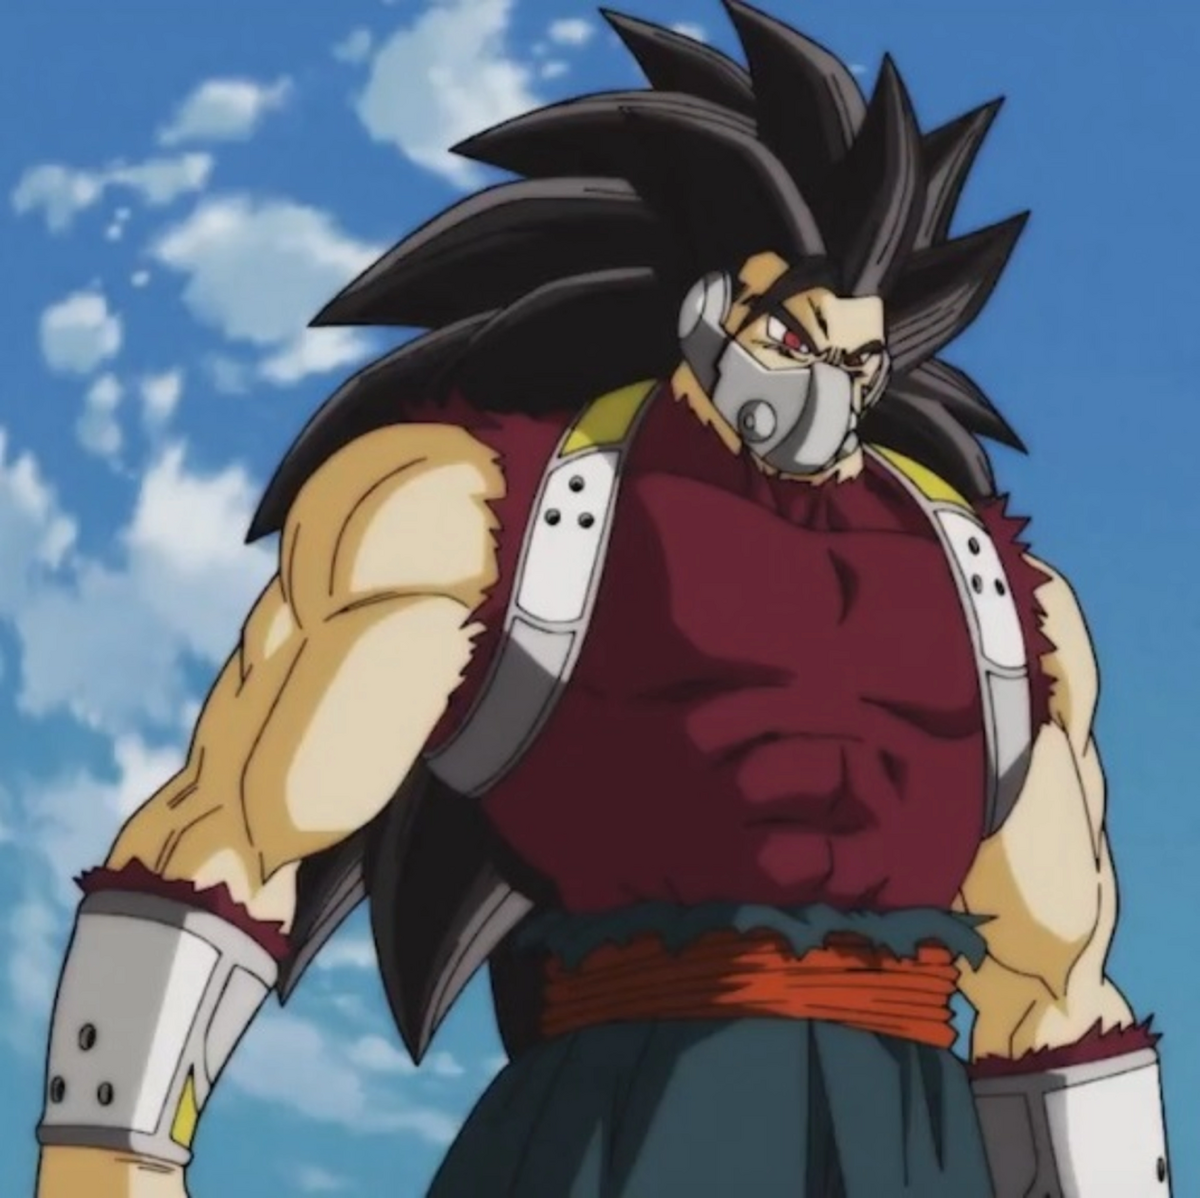 How strong is Goku SSGSS compared to Broly Legendary Super Saiyan? - Quora